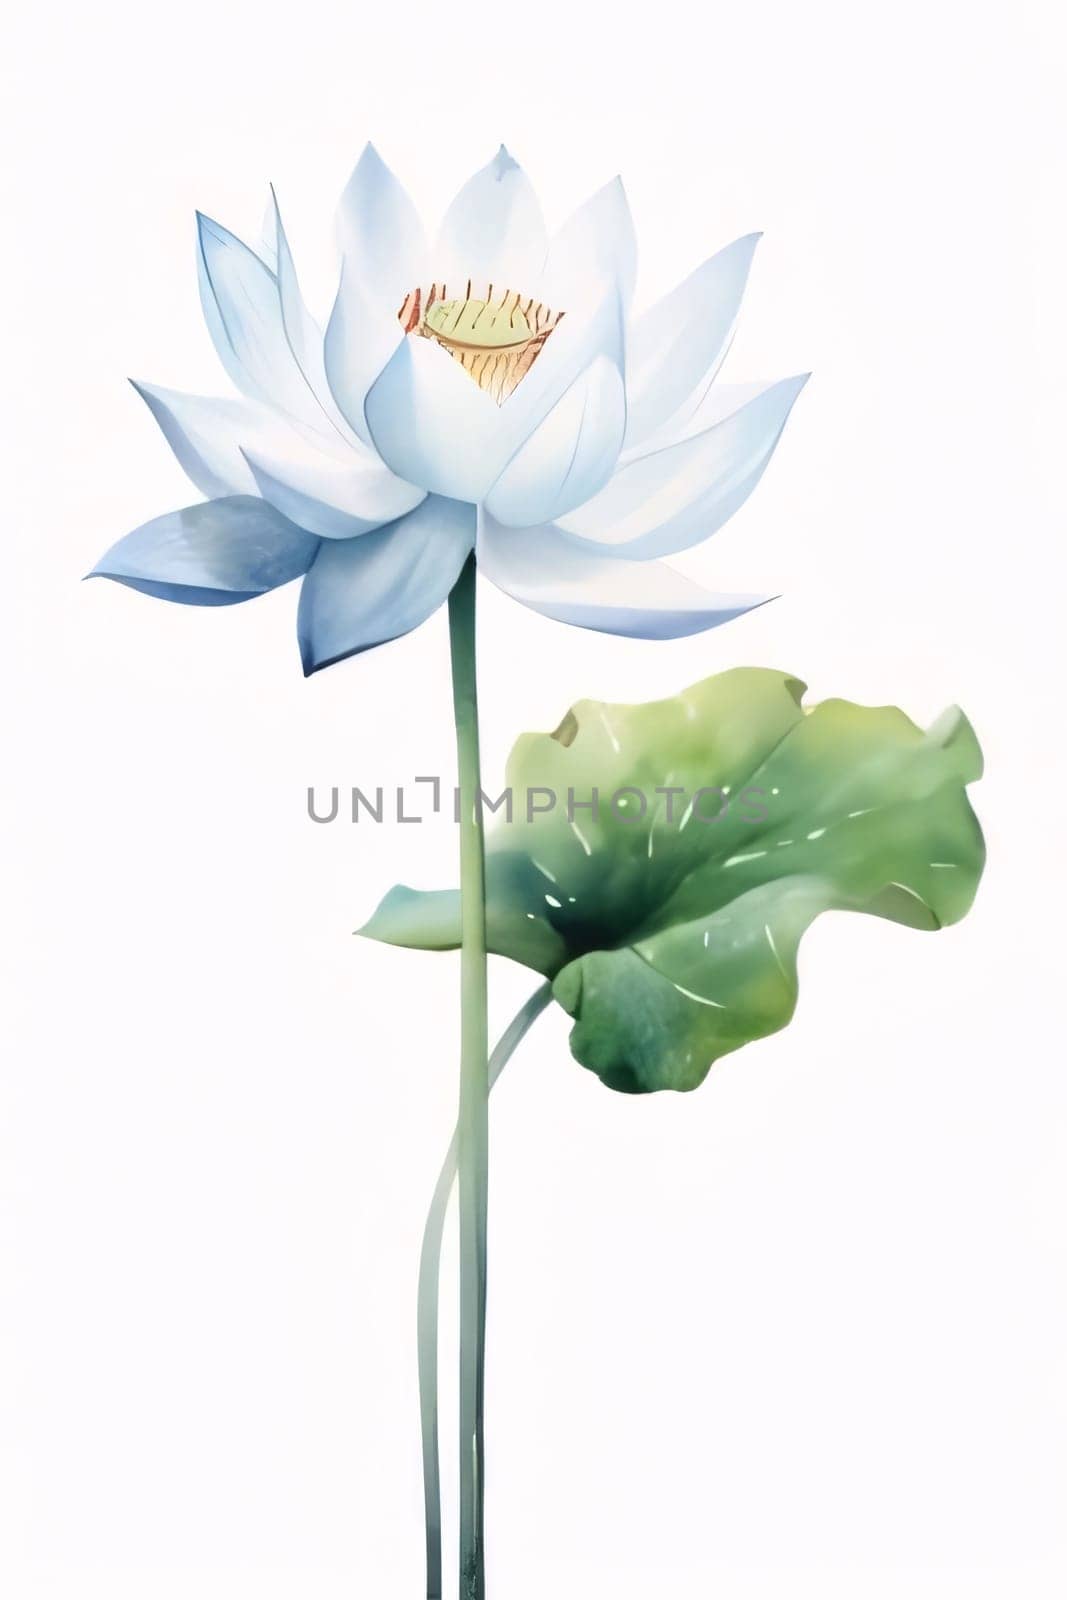 Drawn, painted white lotus flower on isolated white background. Flowering flowers, a symbol of spring, new life. by ThemesS